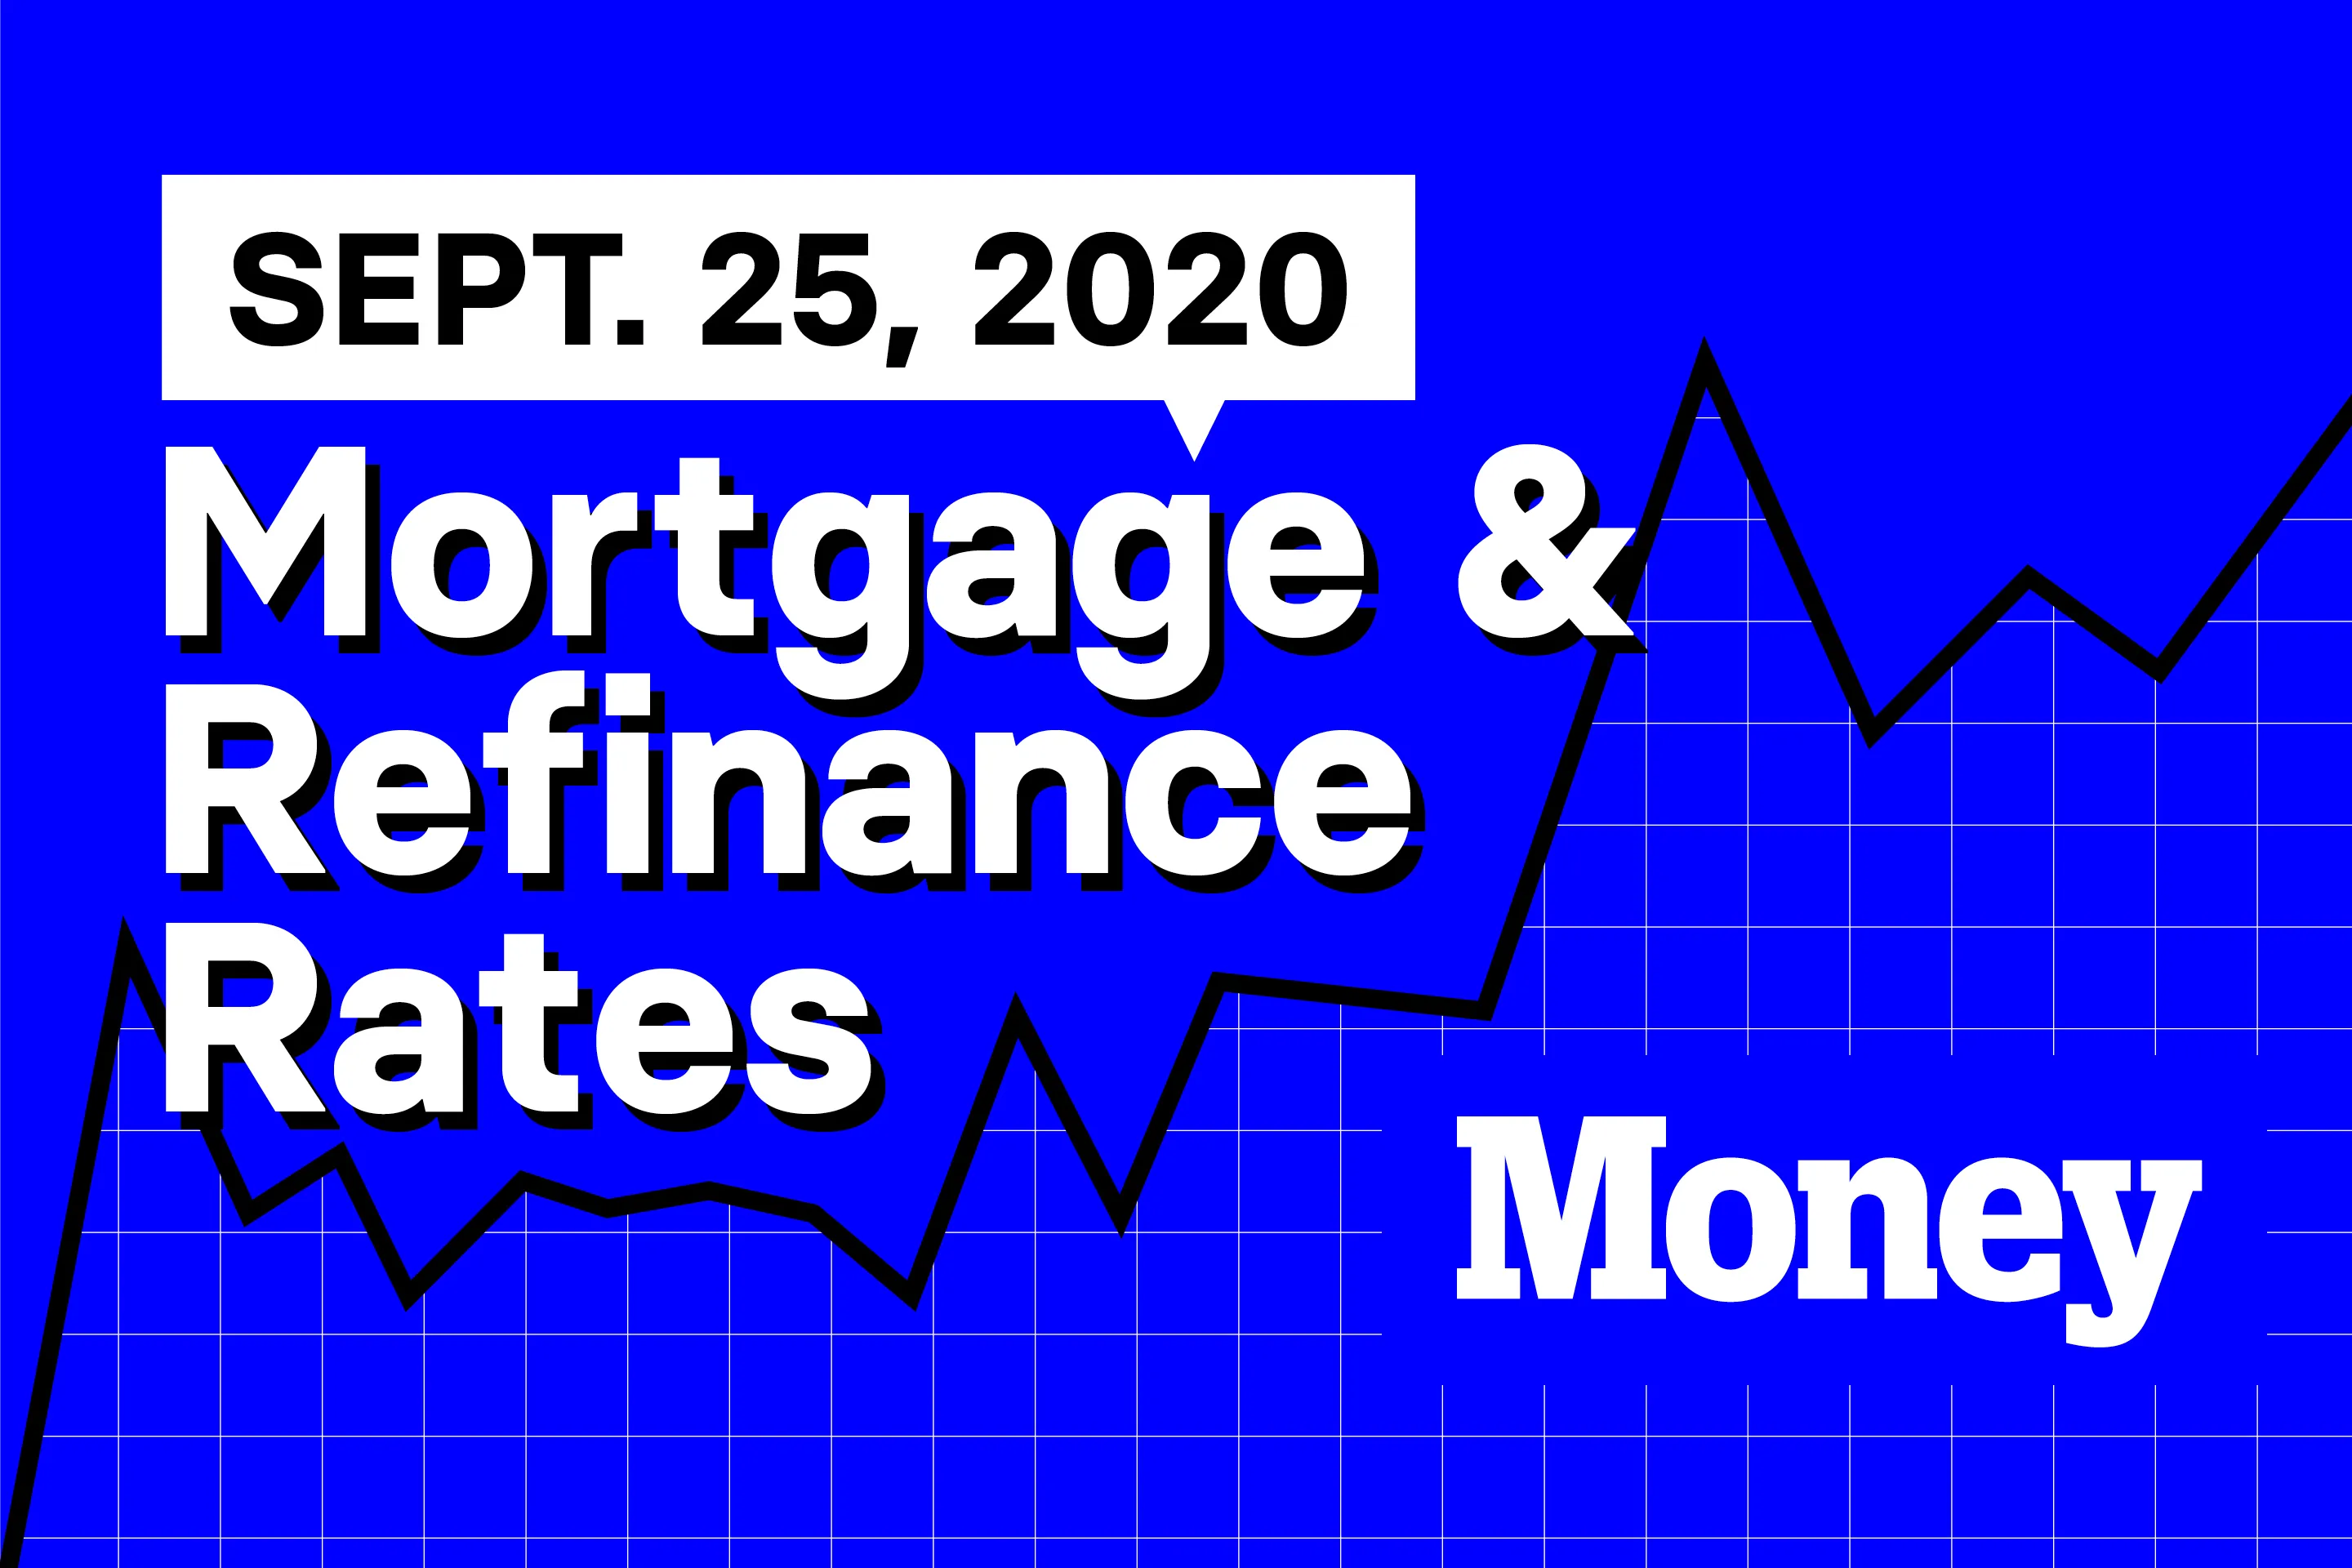 Here Are Todays Best Mortgage & Refinance Rates for September 25, 2020